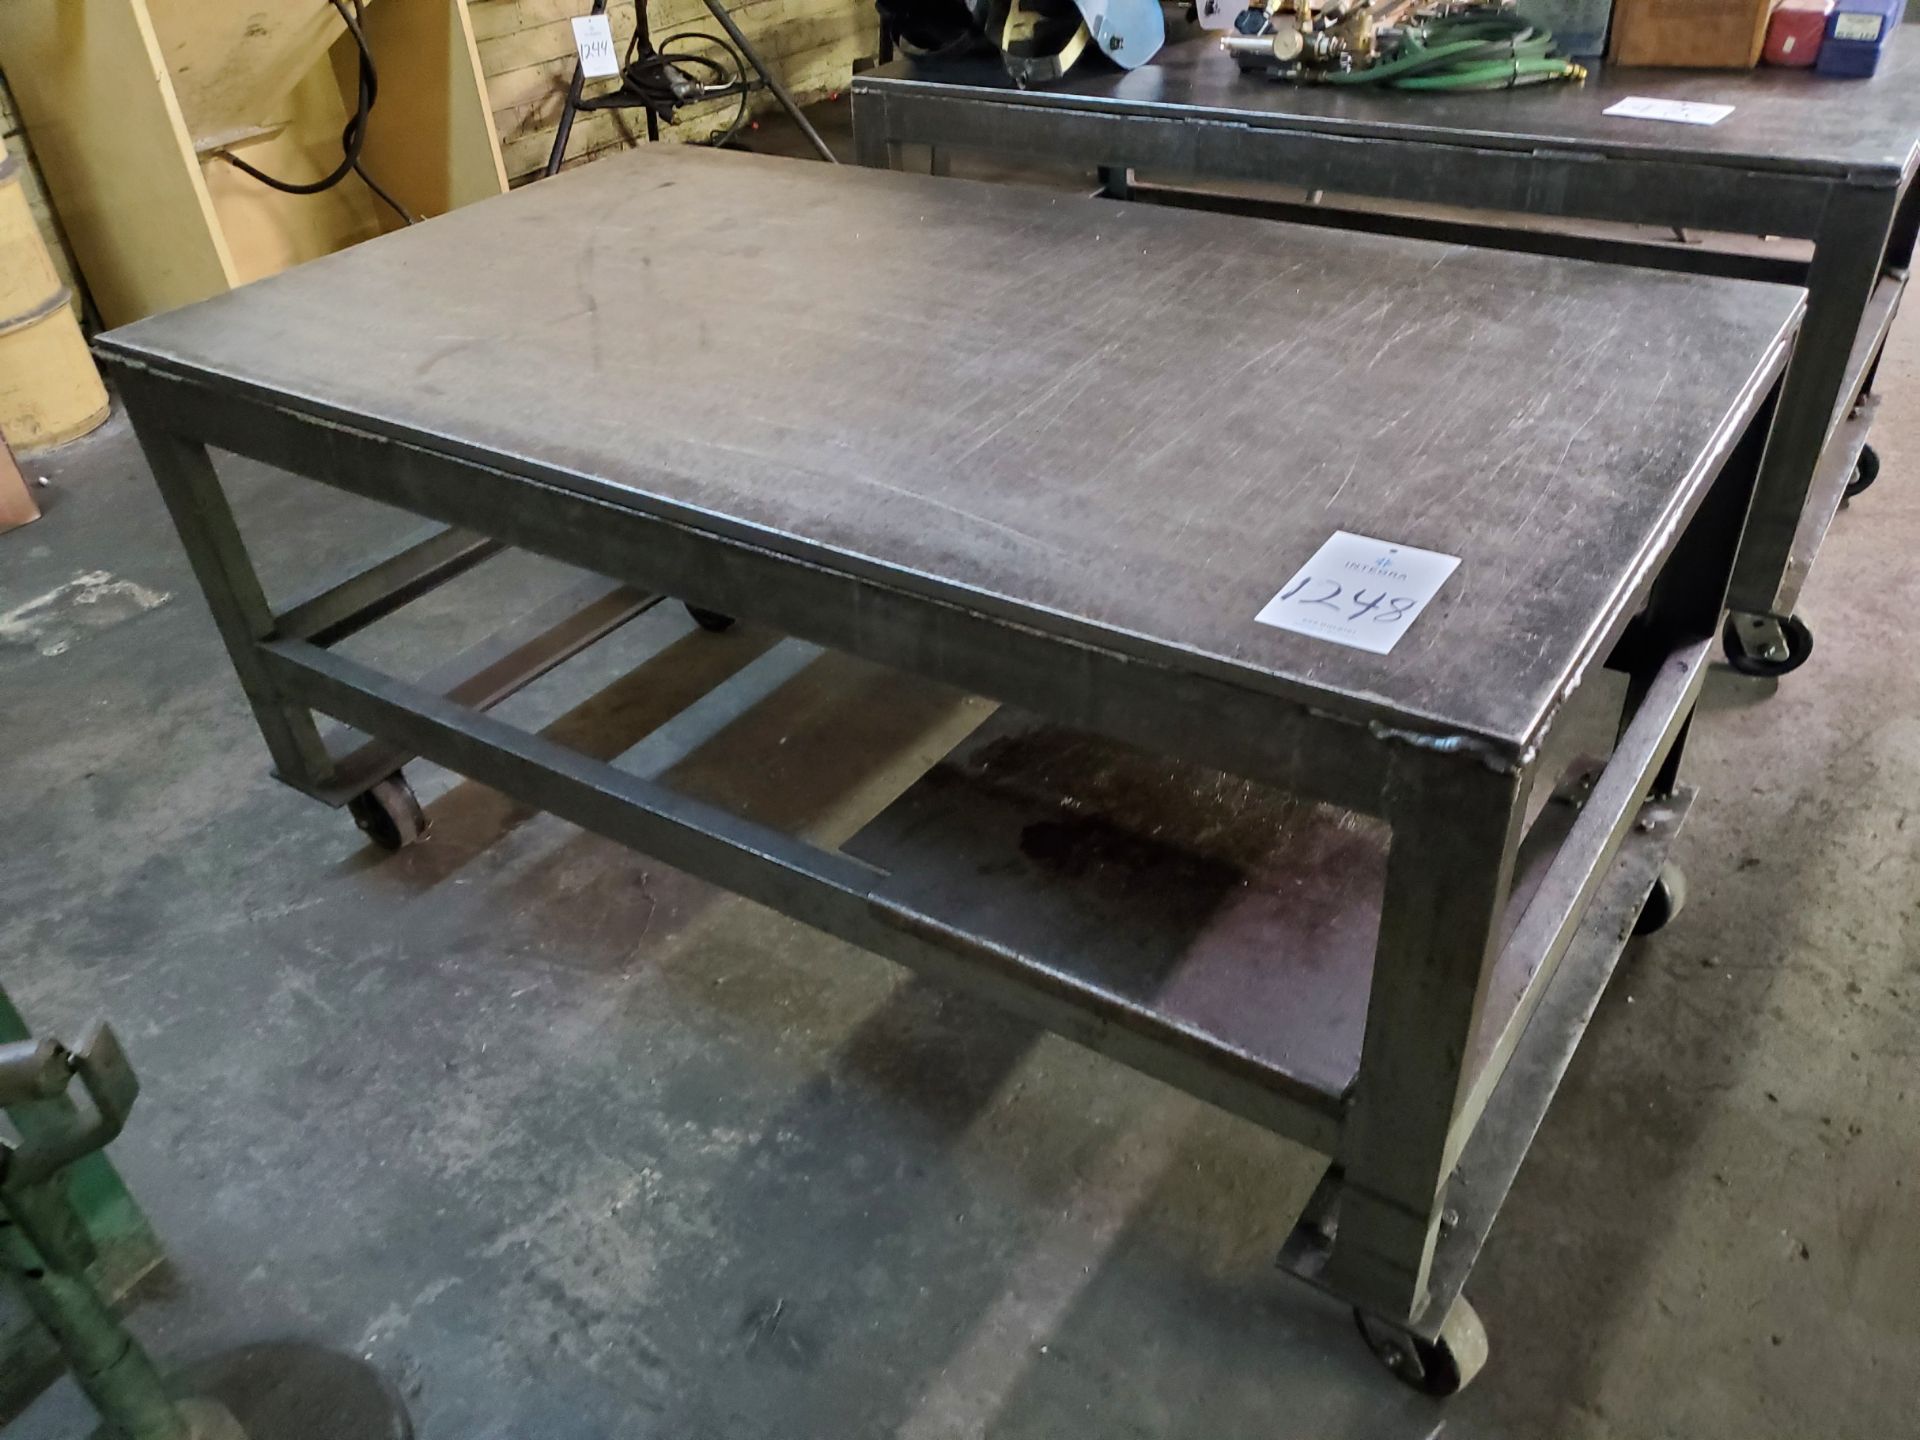 36" x 64" x 3/4" Steel Table on Casters